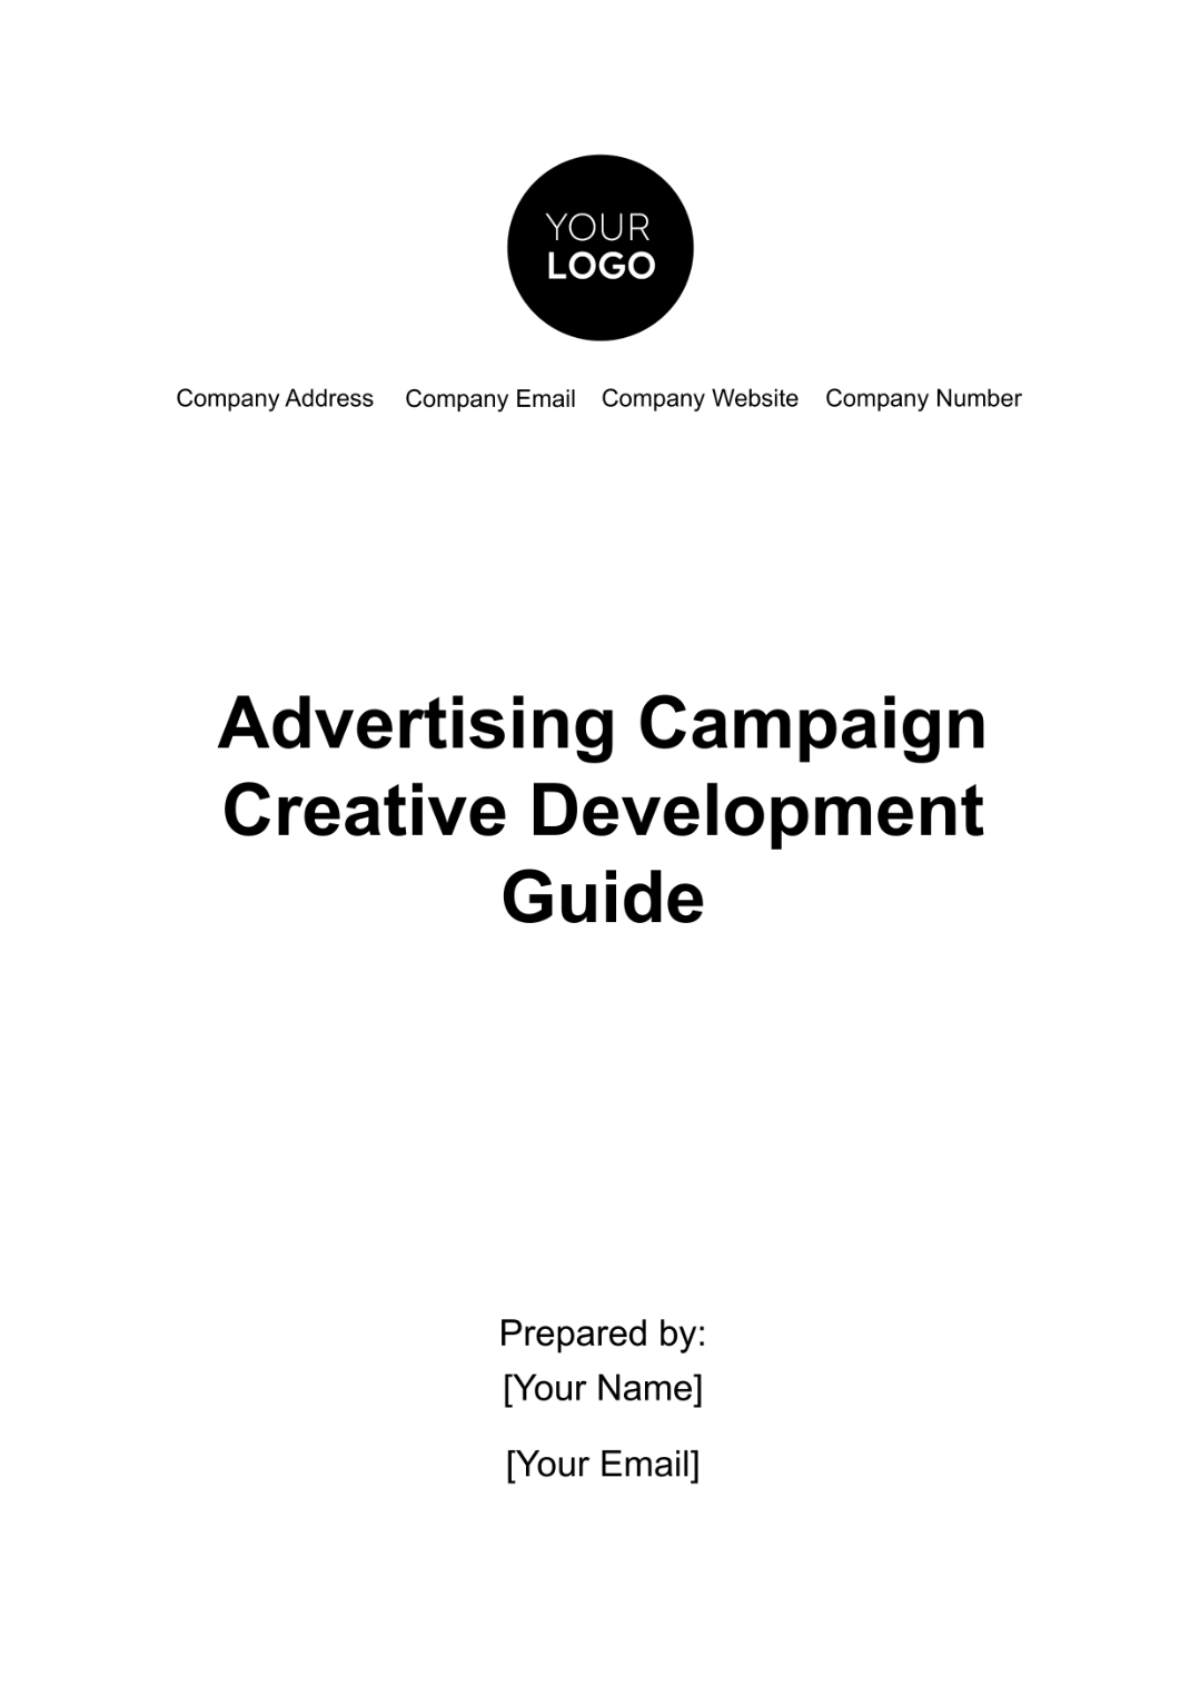 Free Advertising Campaign Creative Development Guide Template